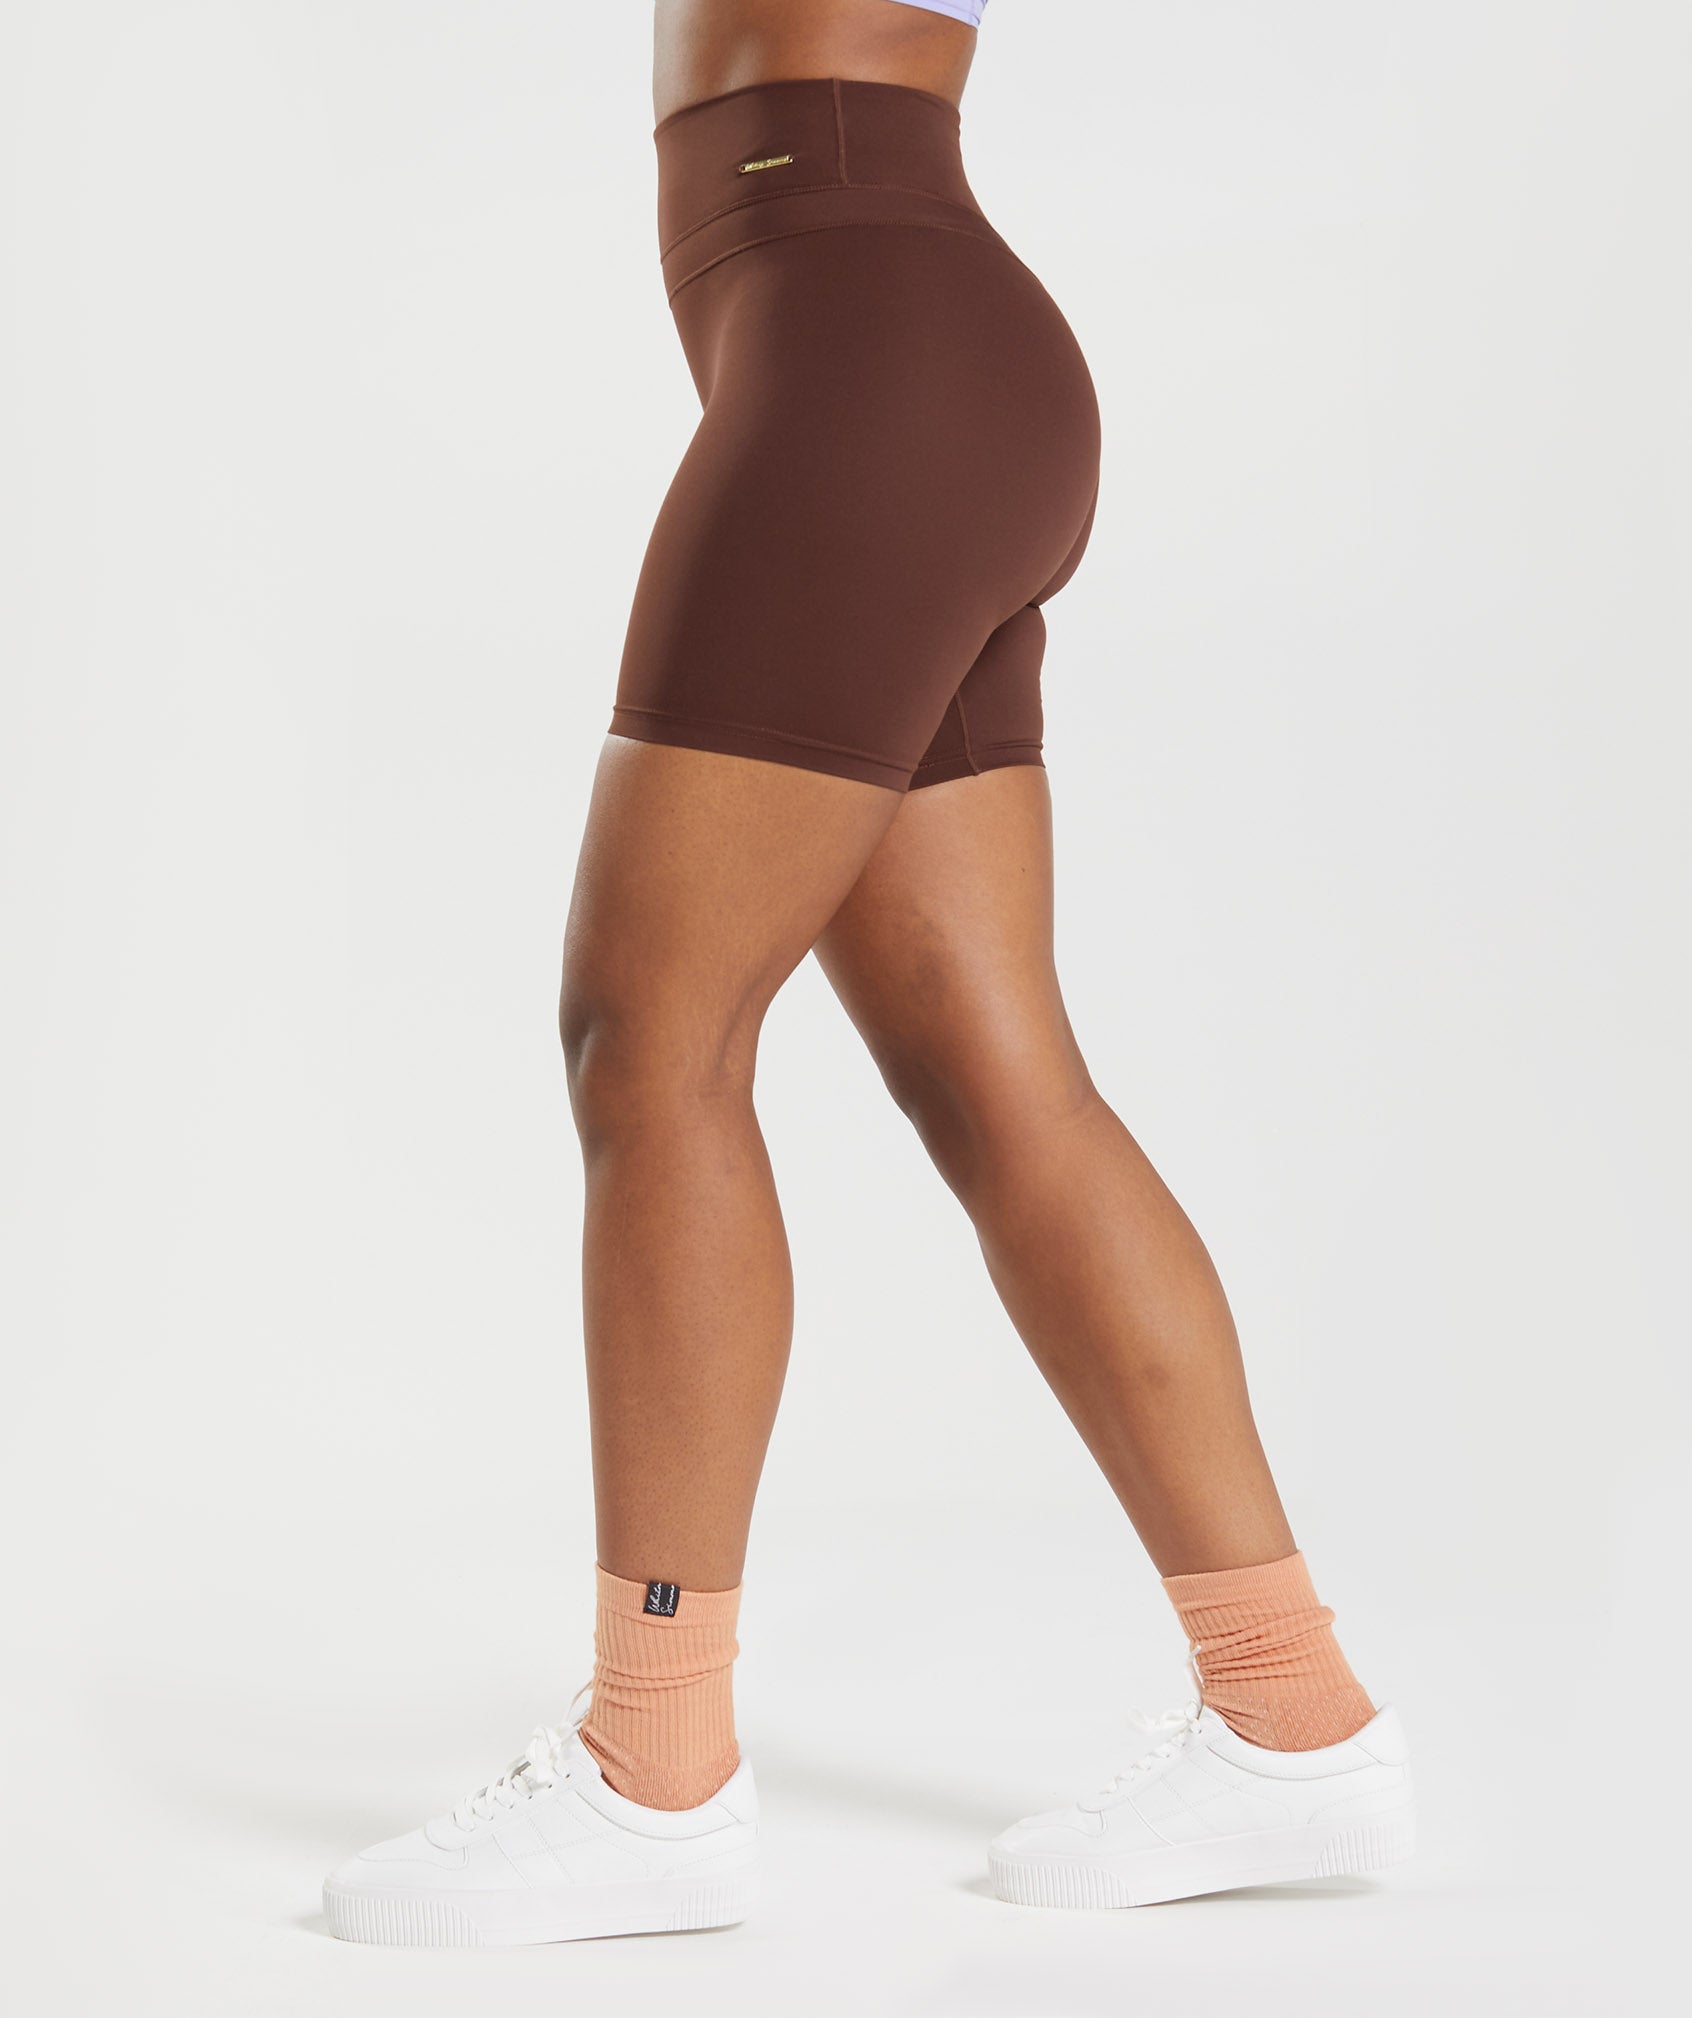 Whitney Cycling Shorts in Rekindle Brown